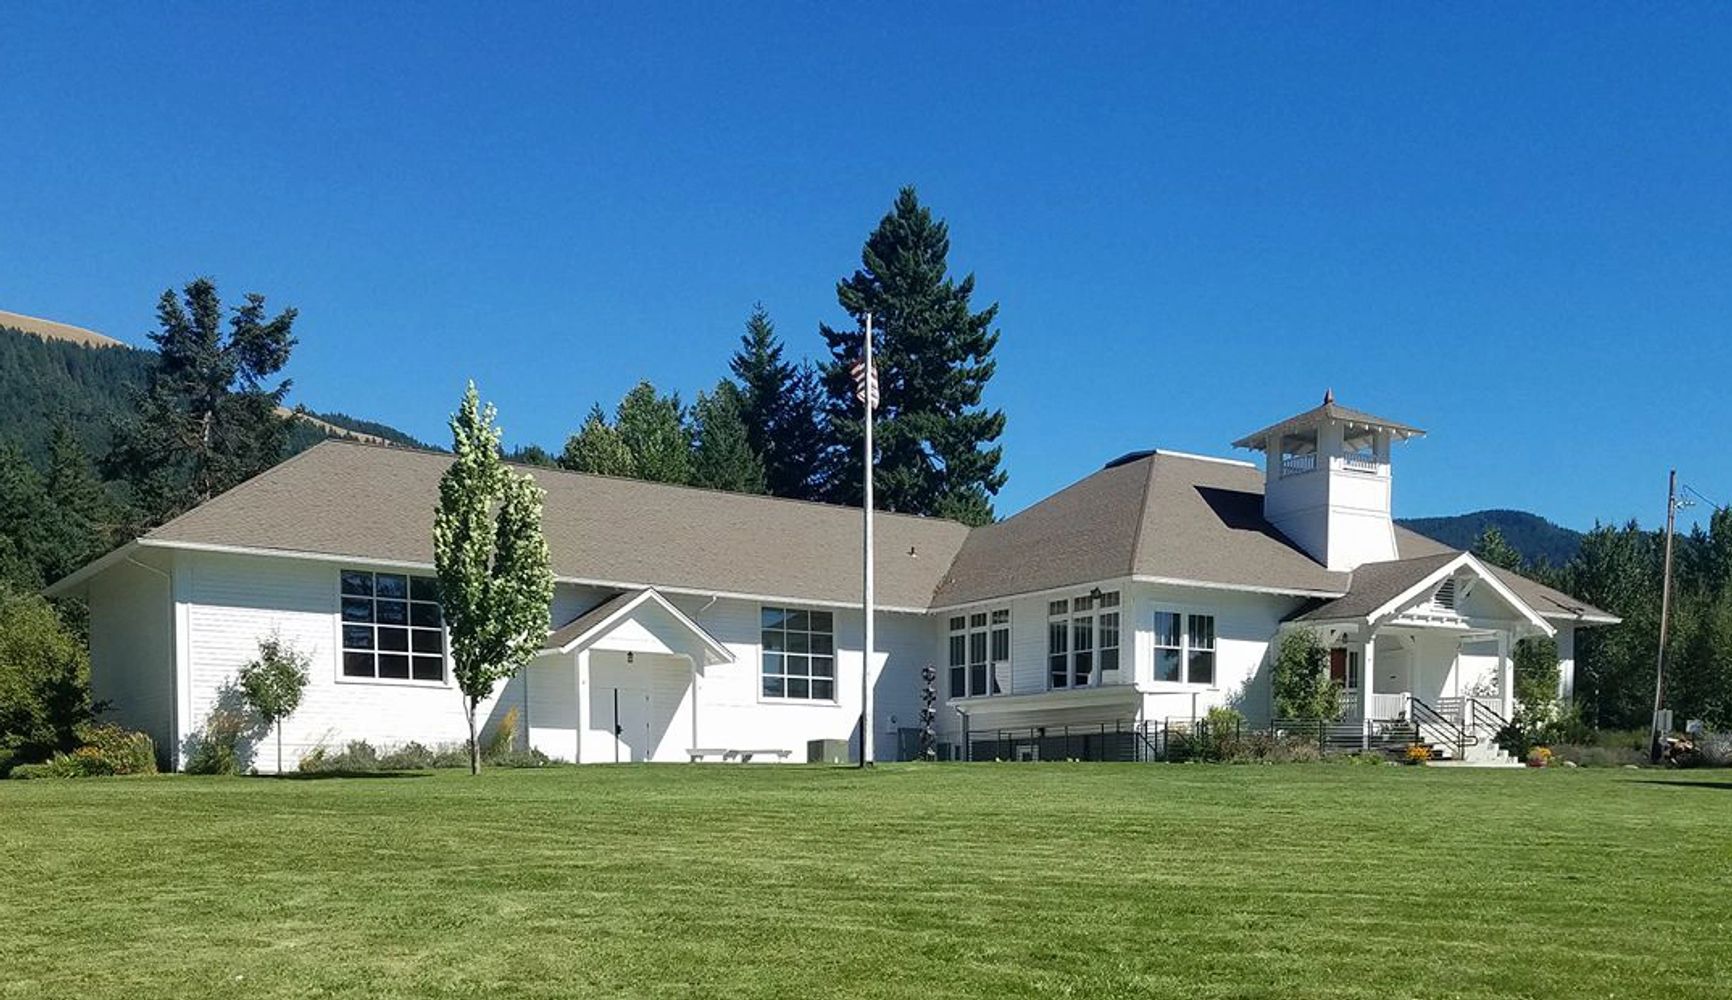 The mt hood town hall in Parkdale, Oregon